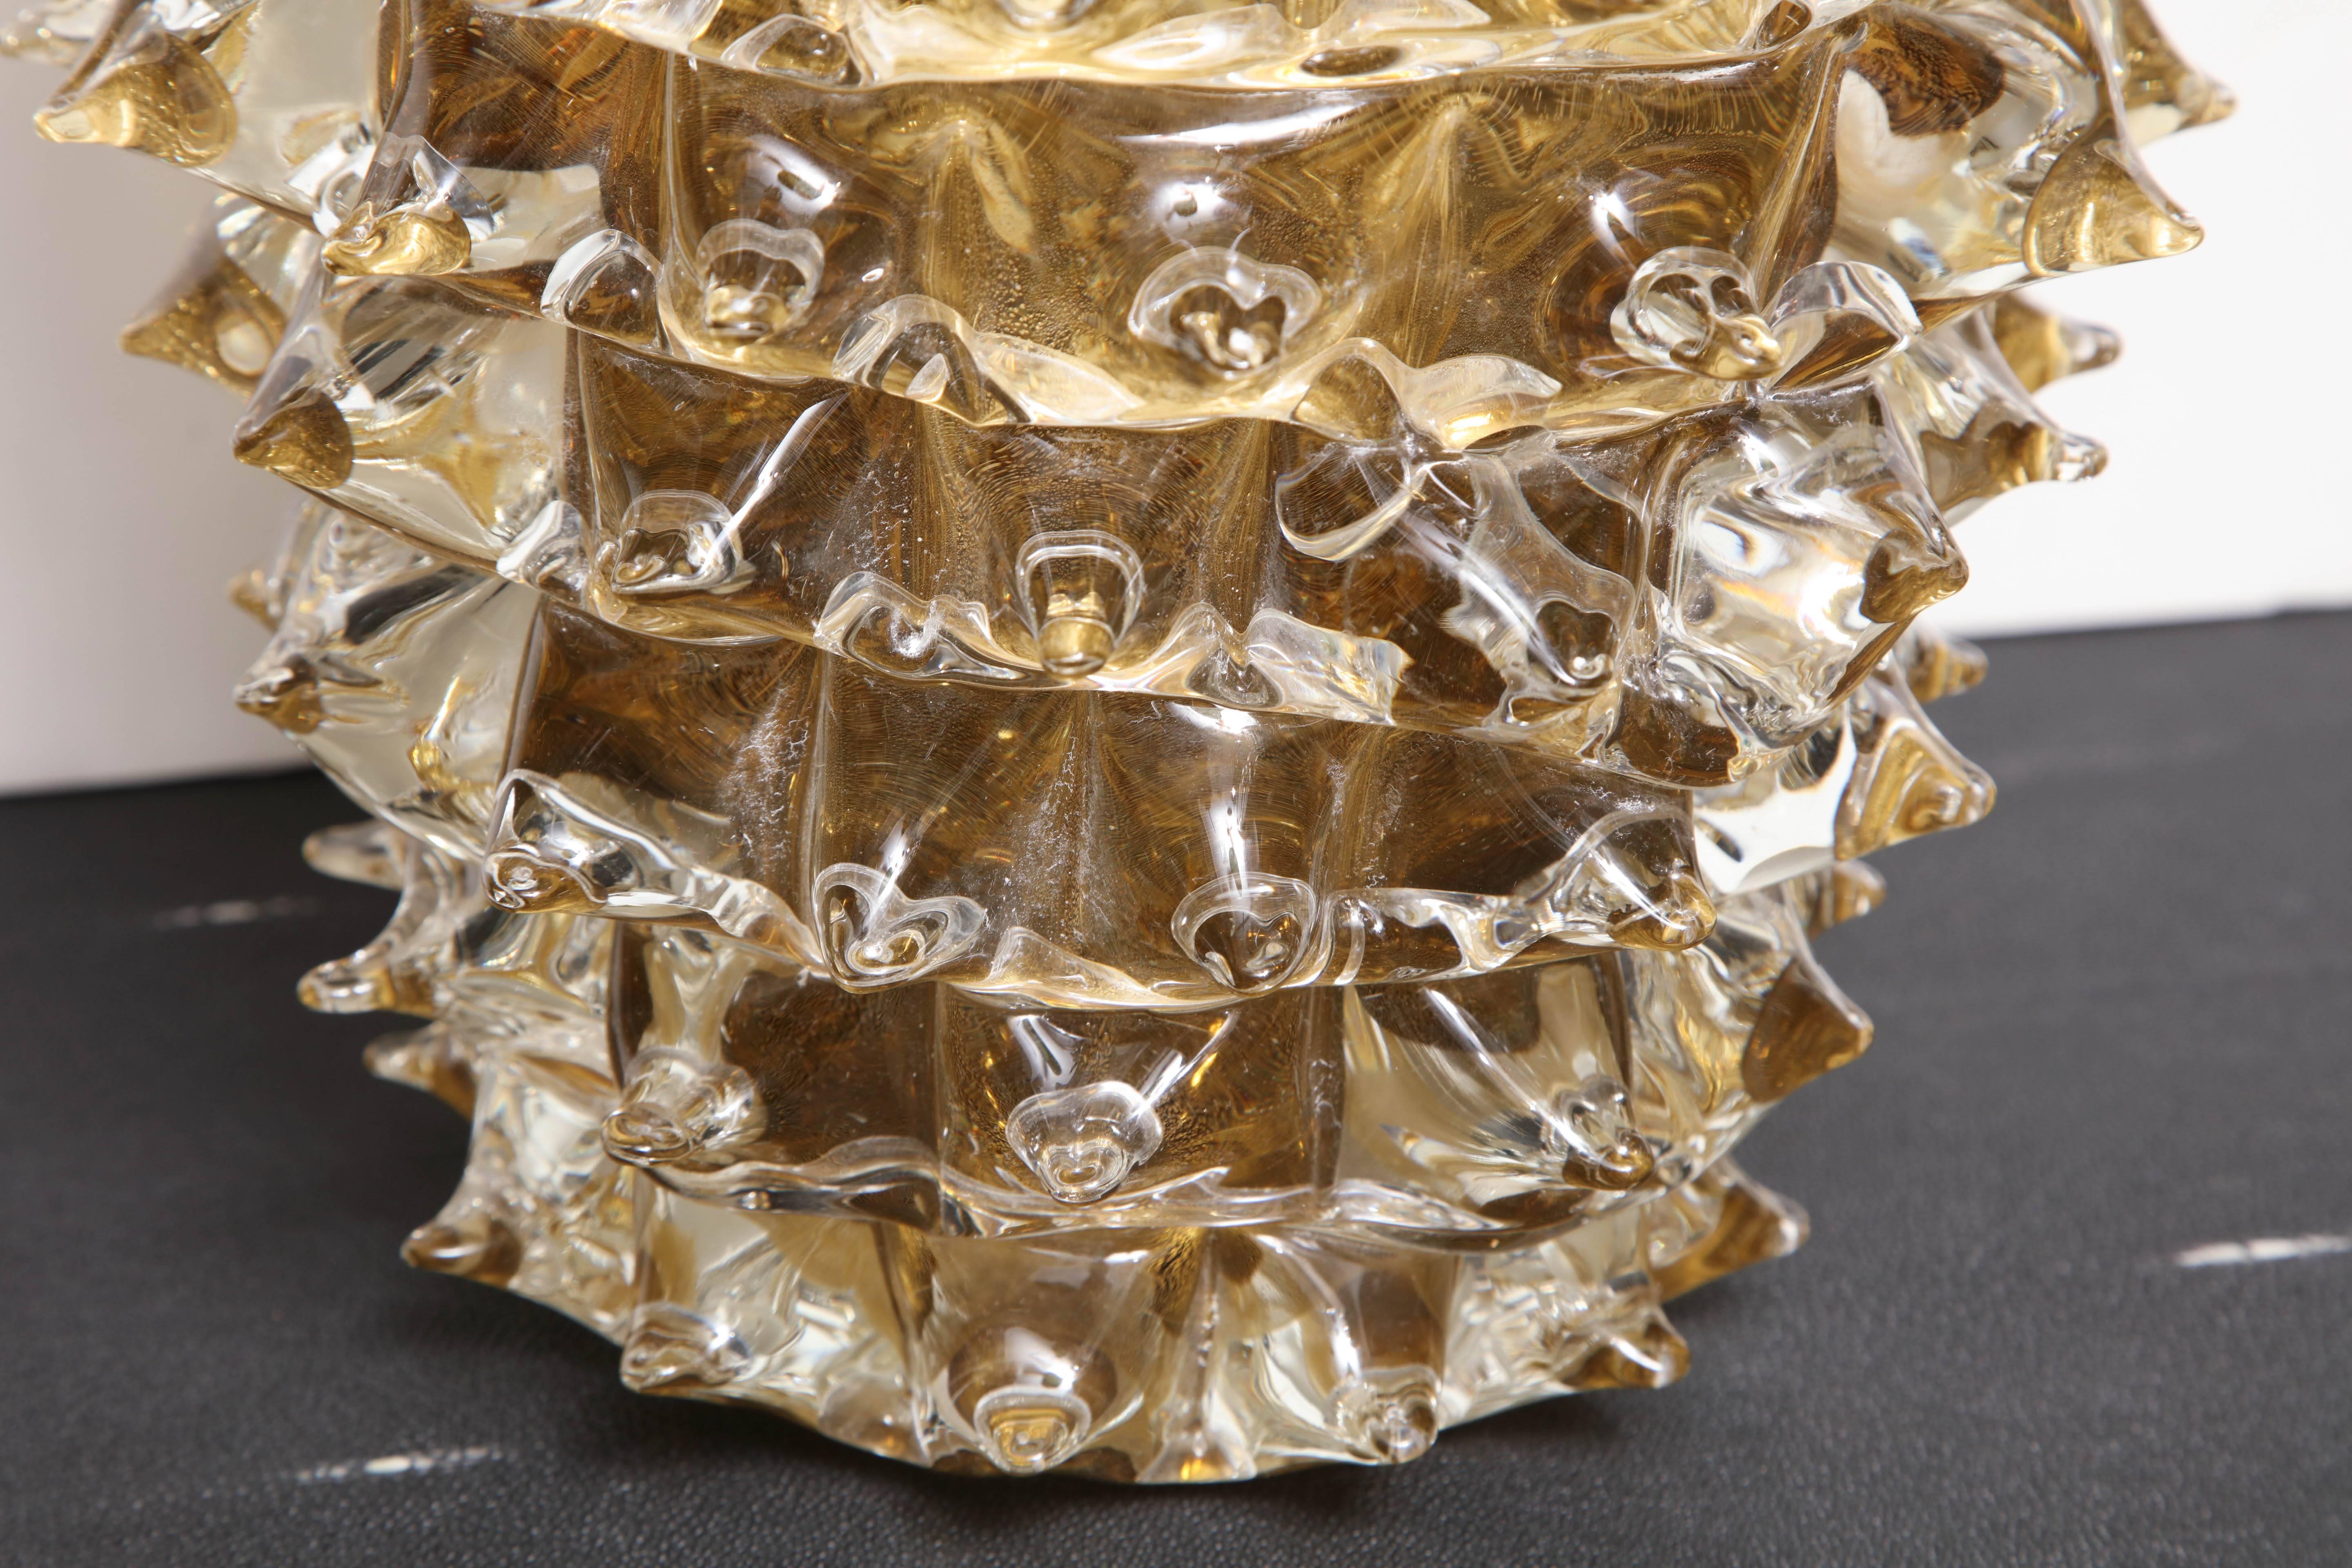 Signed Constantini Gold Spiked Murano Glass Vase 1